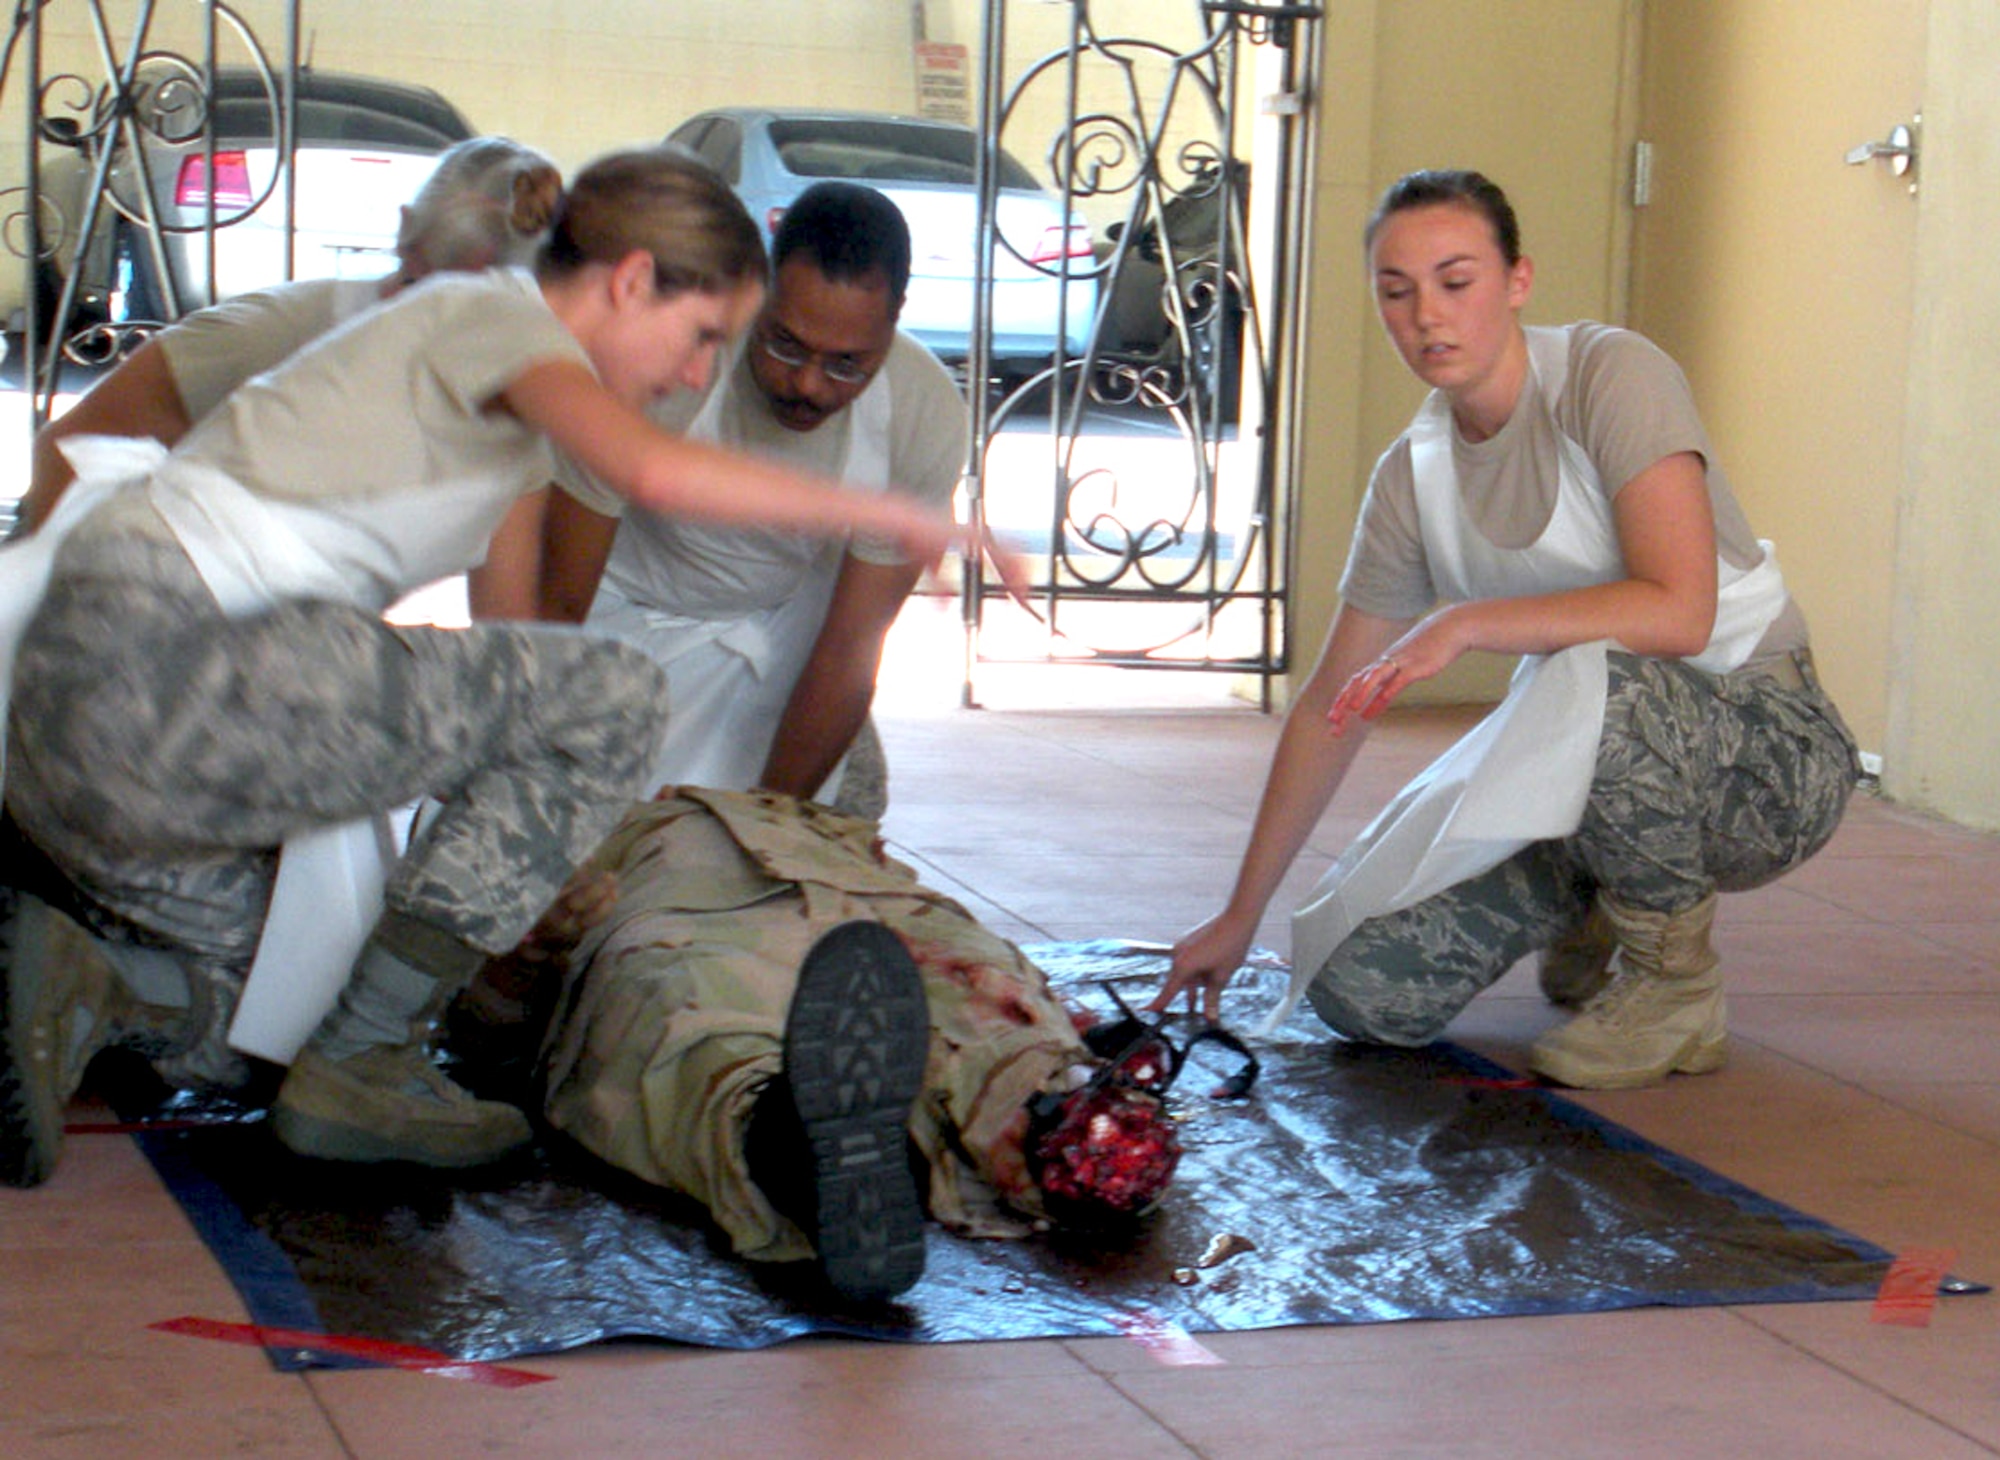 Capt. Shirley Roberts (left, background), Staff Sgt. Tiara Glover (left, foreground), Master Sgt. Philip Baker (center) and Airman Erica Koontz perform training on a mannequin patient during annual training at the Scottsdale, Ariz., Healthcare Military Training Center June 21, 2011.  (Photo by Keith Jones/110621-F-SA253-001)